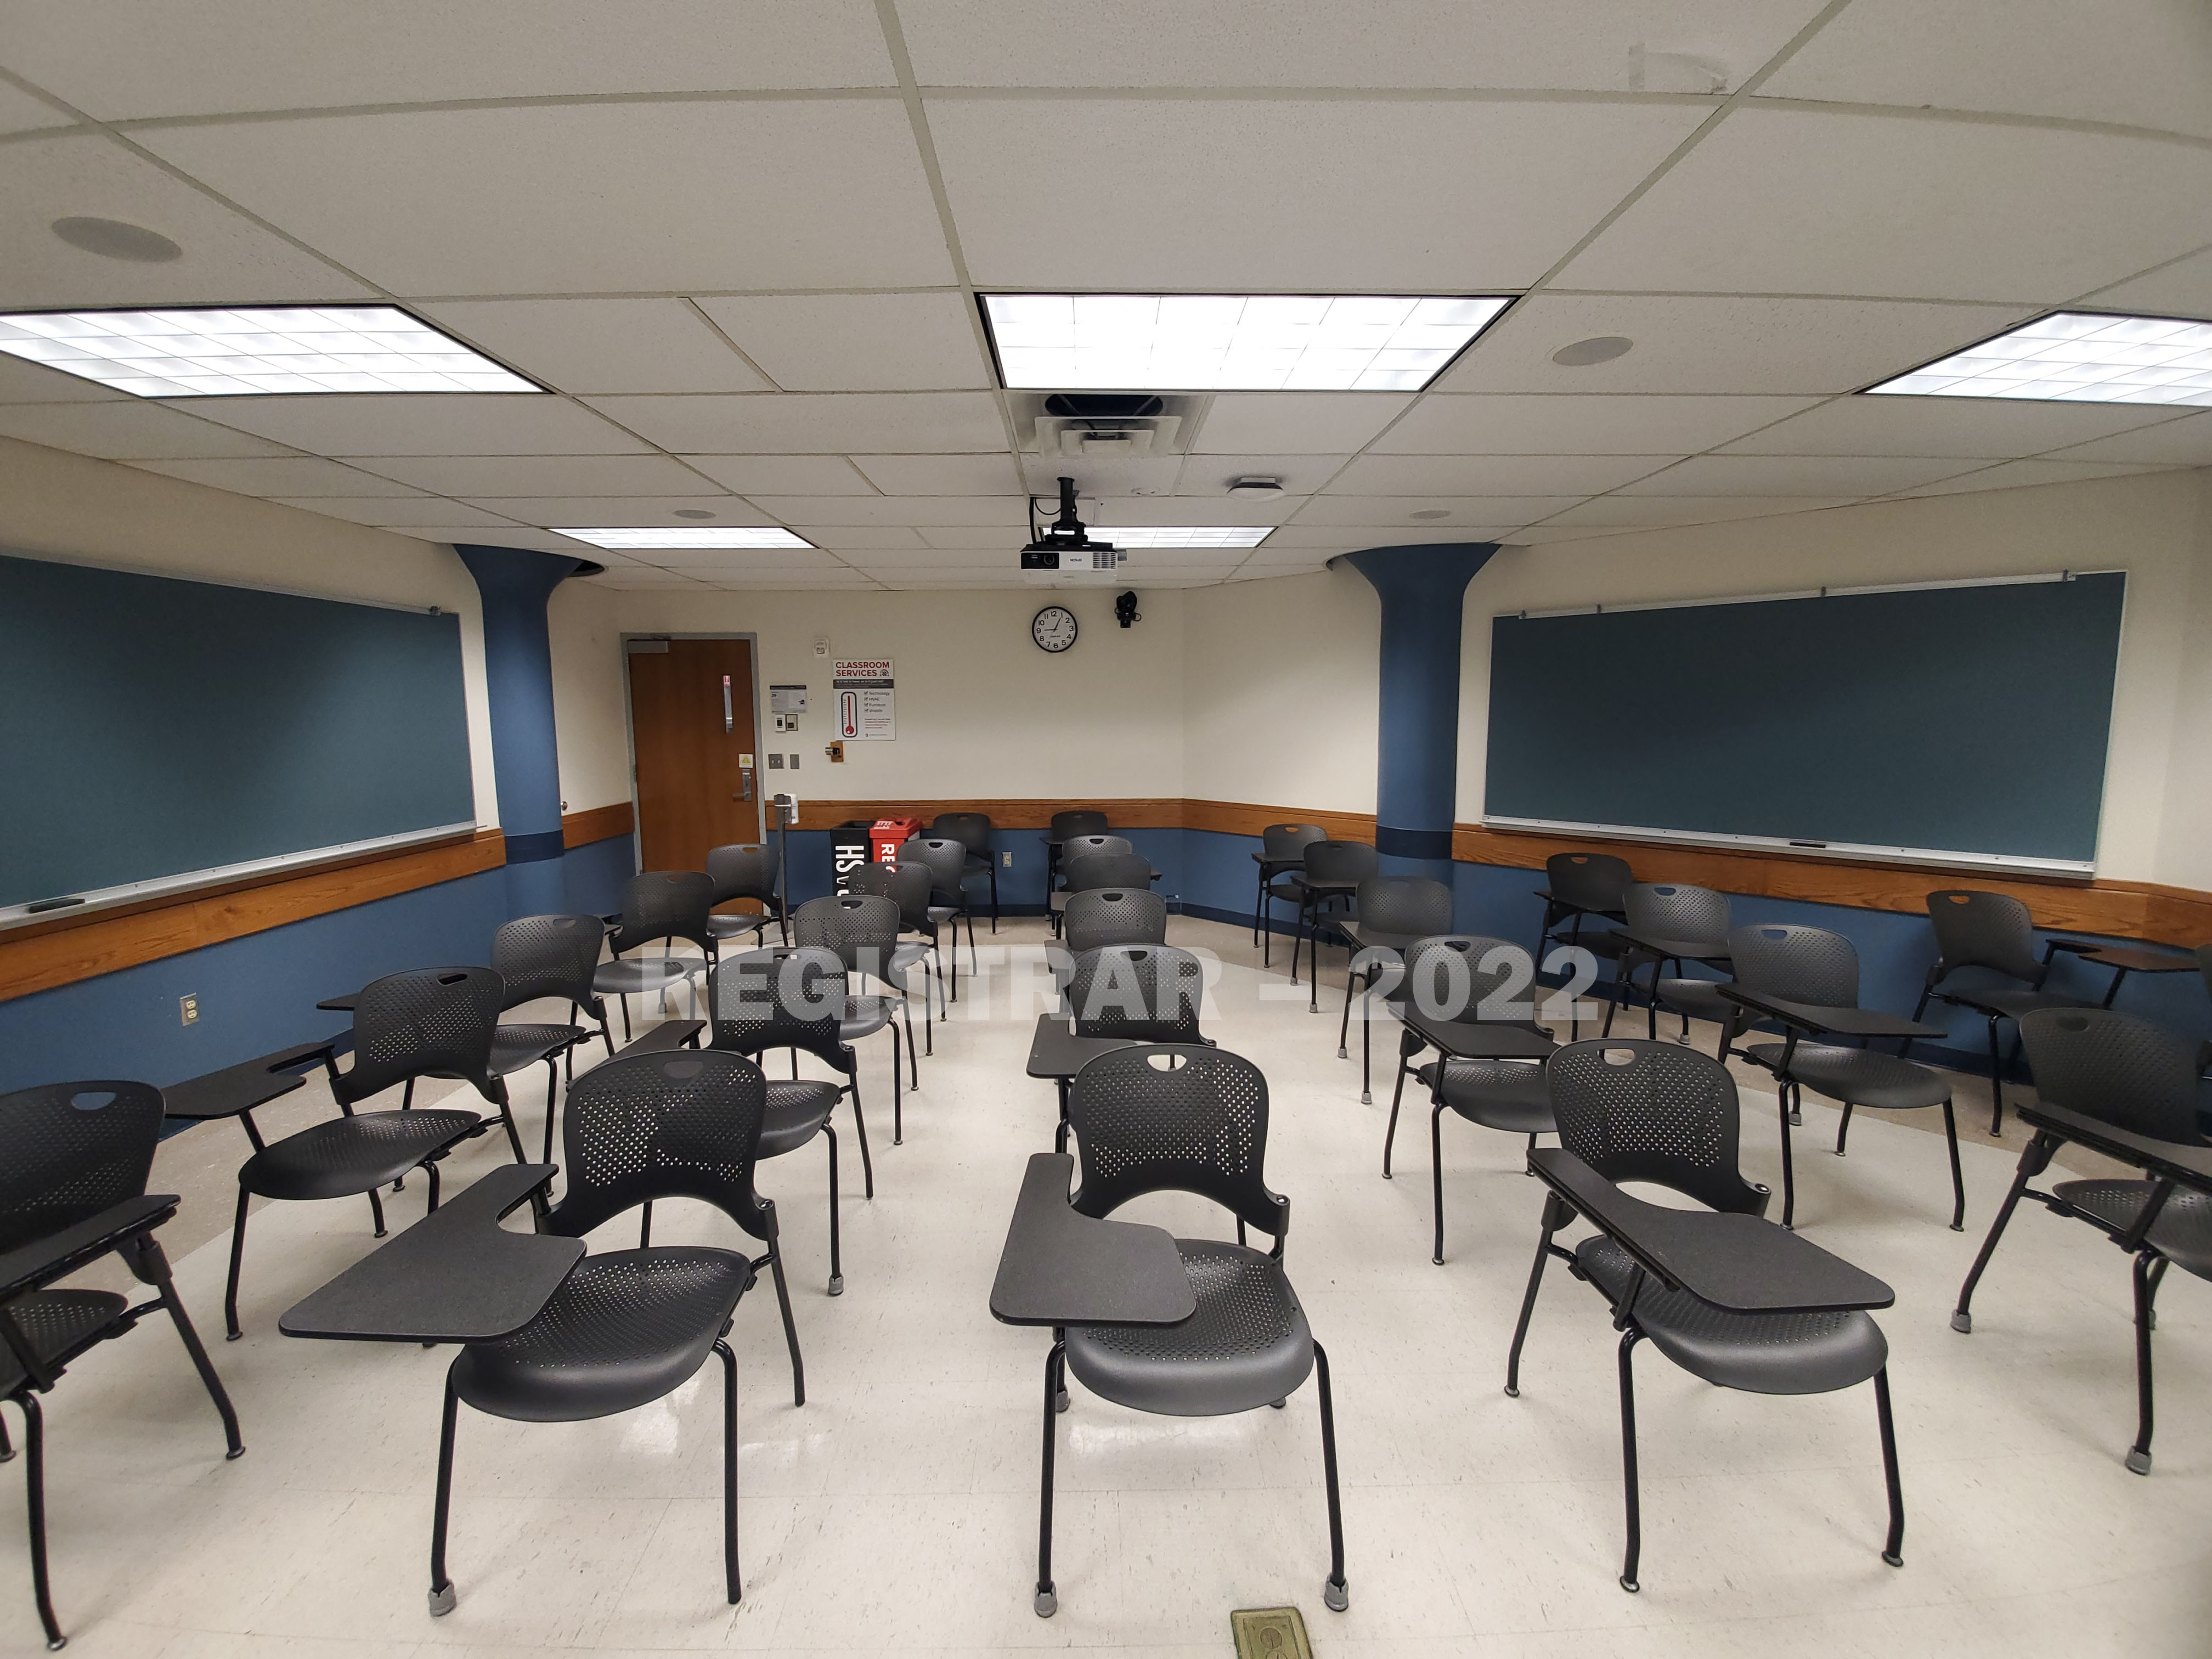 Enarson Classroom Building room 209 ultra wide angle view from the front of the room